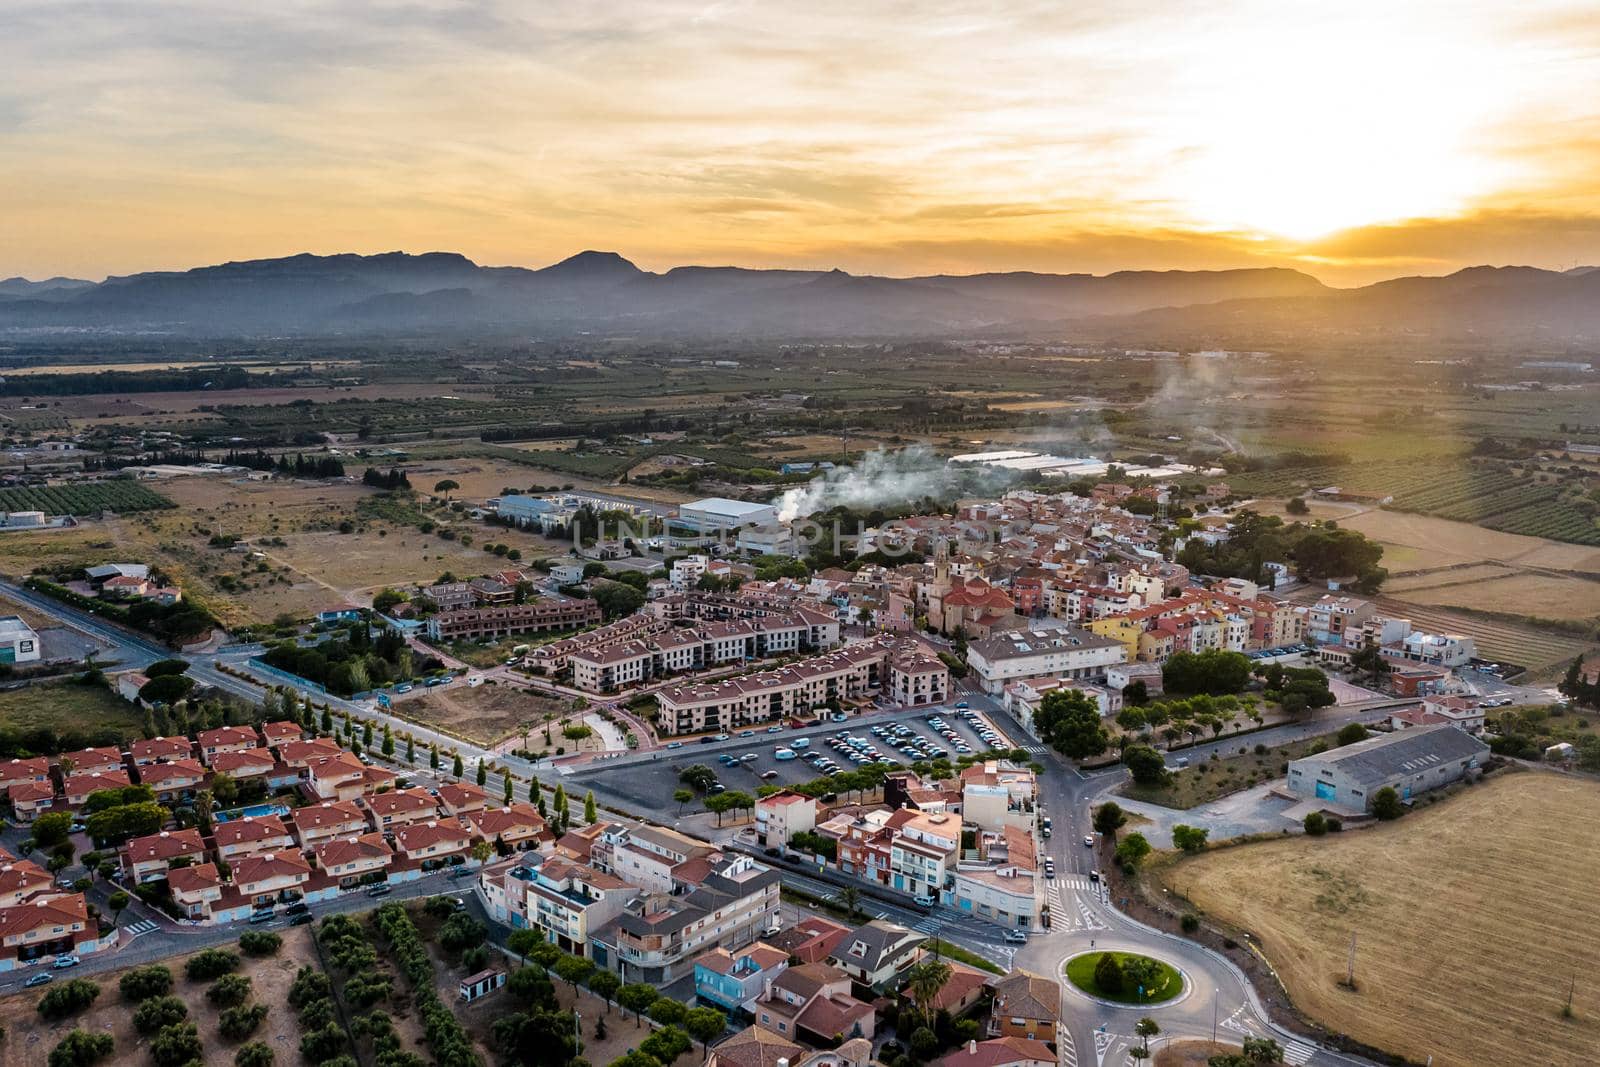 top view of Vinyols i Archs village, Baix Camp, at sunset near of the mountains in Tarragona, next to fields and agriculture industry, aerial view